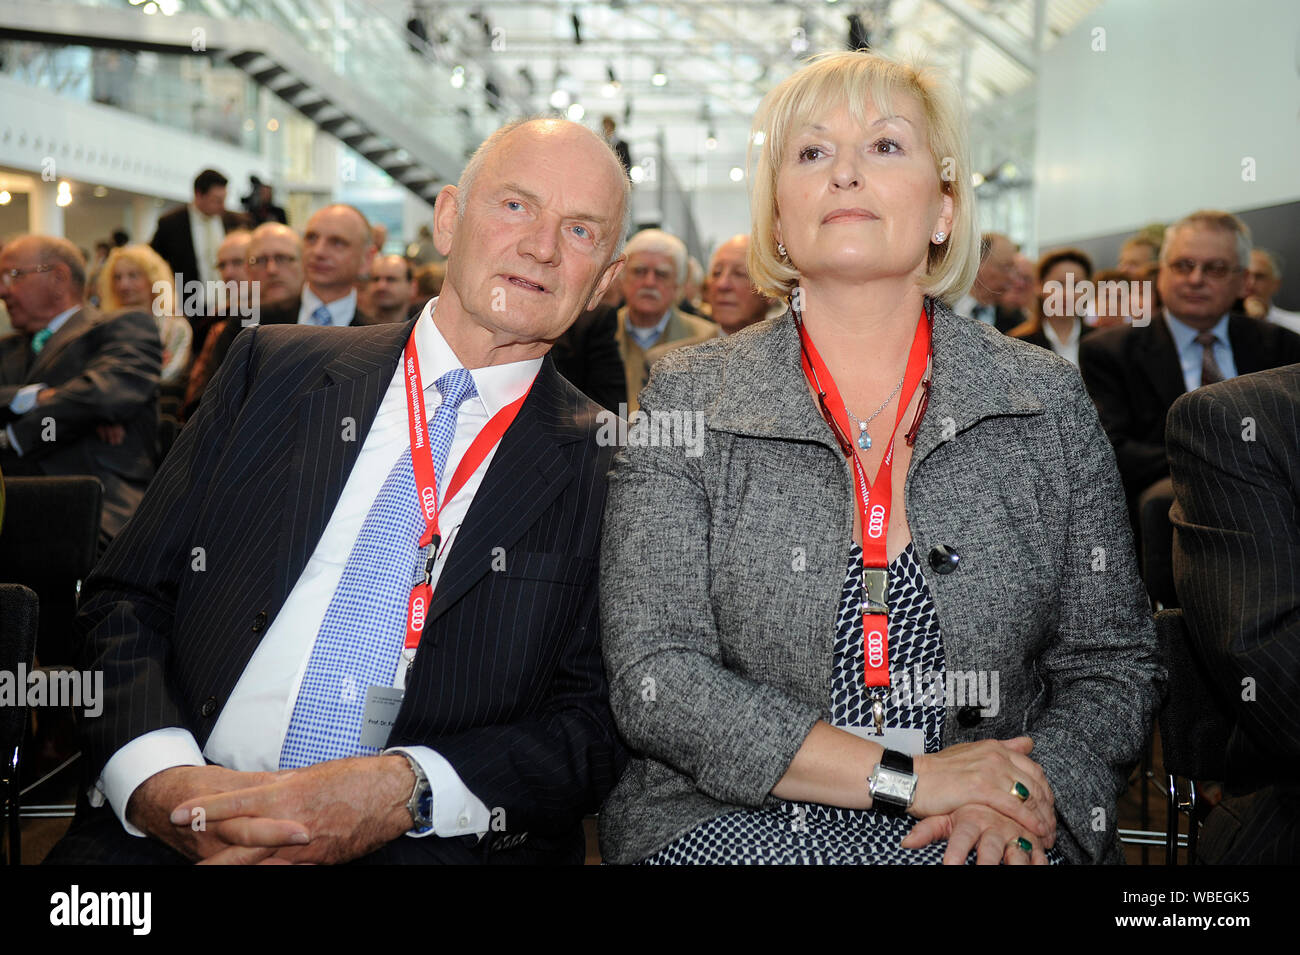 Ingolstadt. 7th May, 2008. Ferdinand PIECH died at the age of 82 years. Archive photo: Prof.Dr. Ing. Ferdinand K.PIECH with wife Ursula. Audi Annual General Meeting on May 7, 2008 in Ingolstadt.Automobilwirtschaft. | usage worldwide Credit: dpa/Alamy Live News Stock Photo